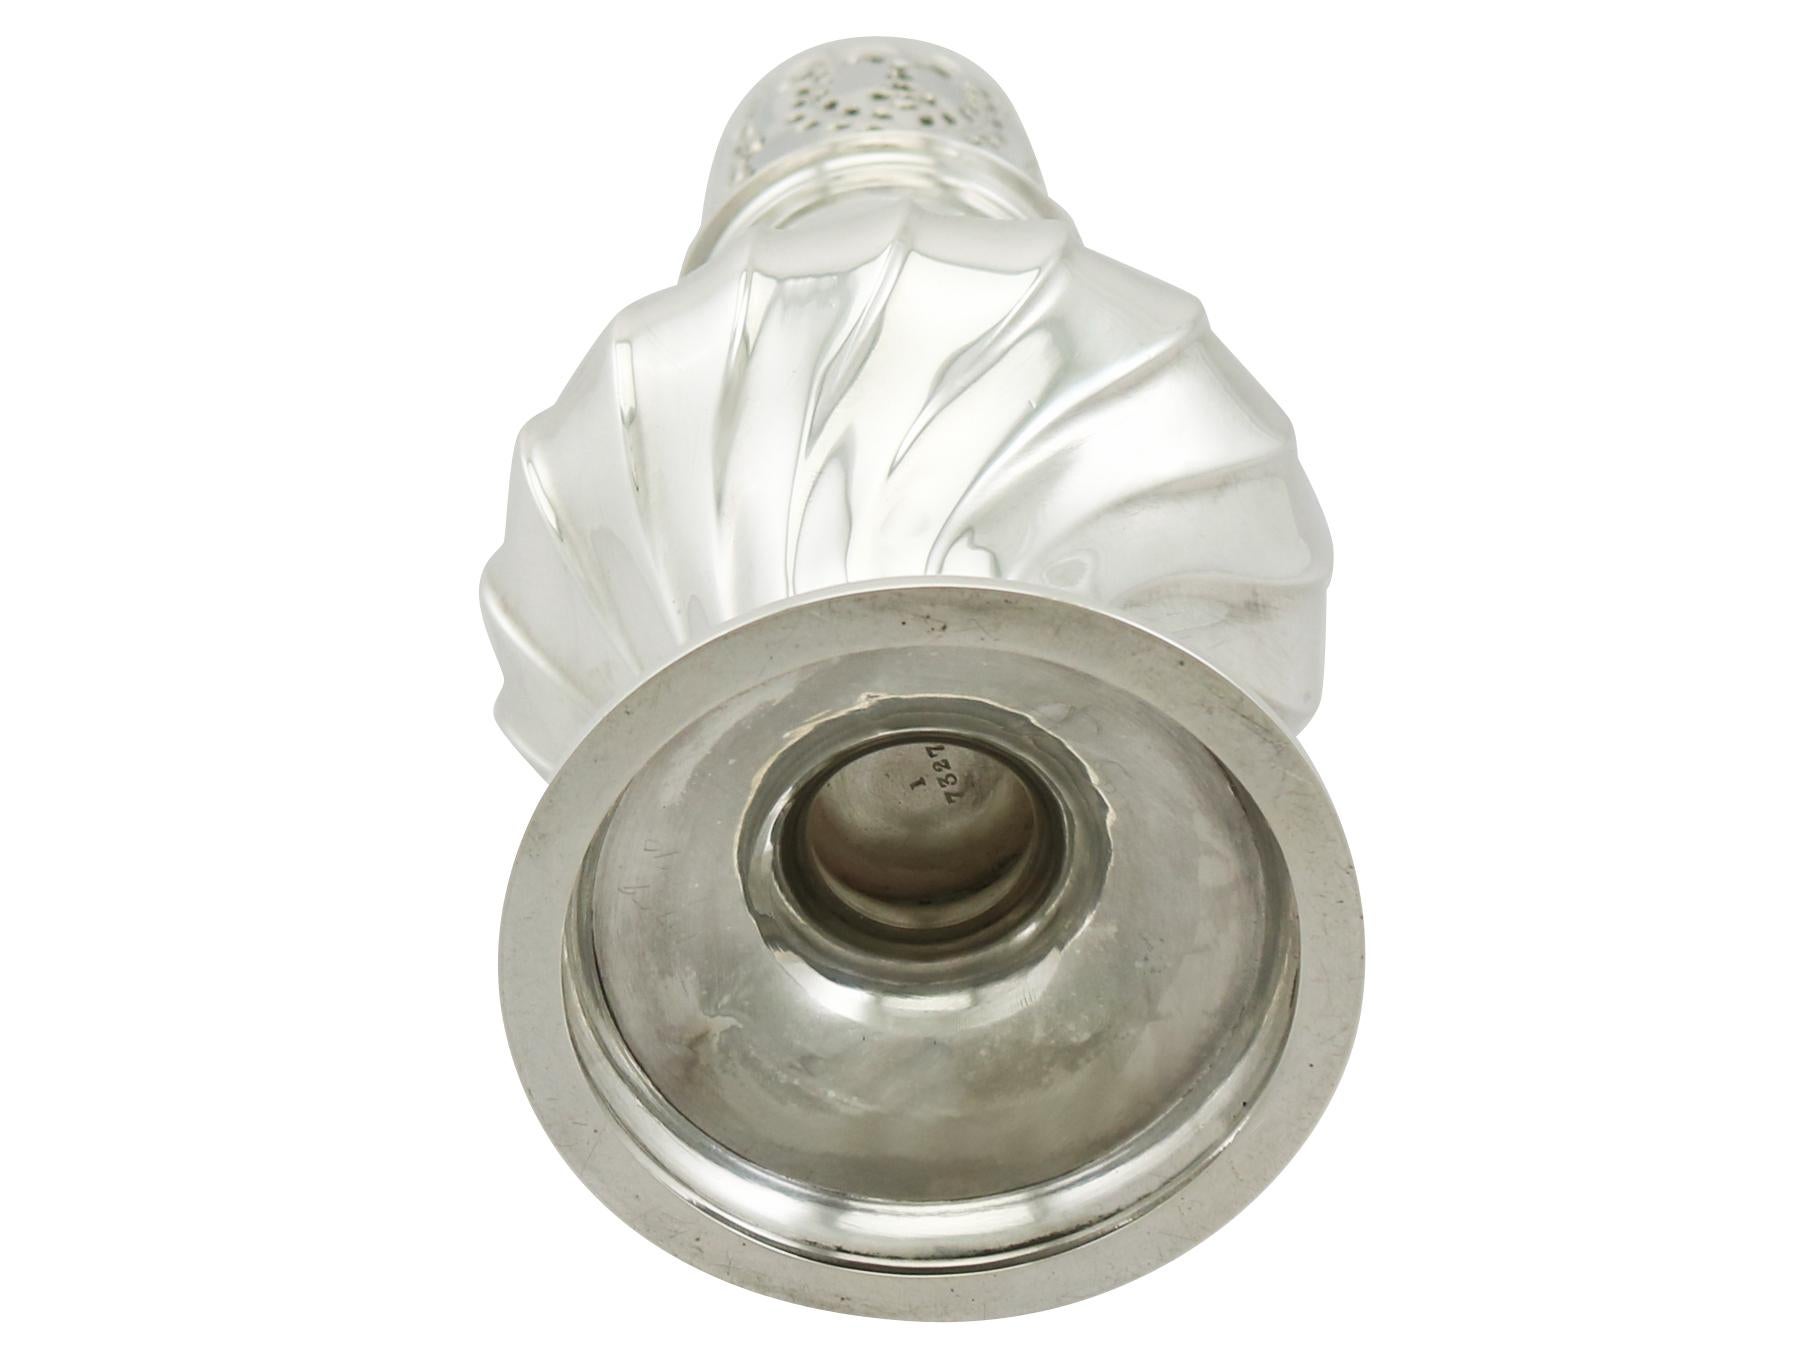 Goldsmiths & Silversmiths Co. Victorian English Sterling Silver Sugar Caster For Sale 3